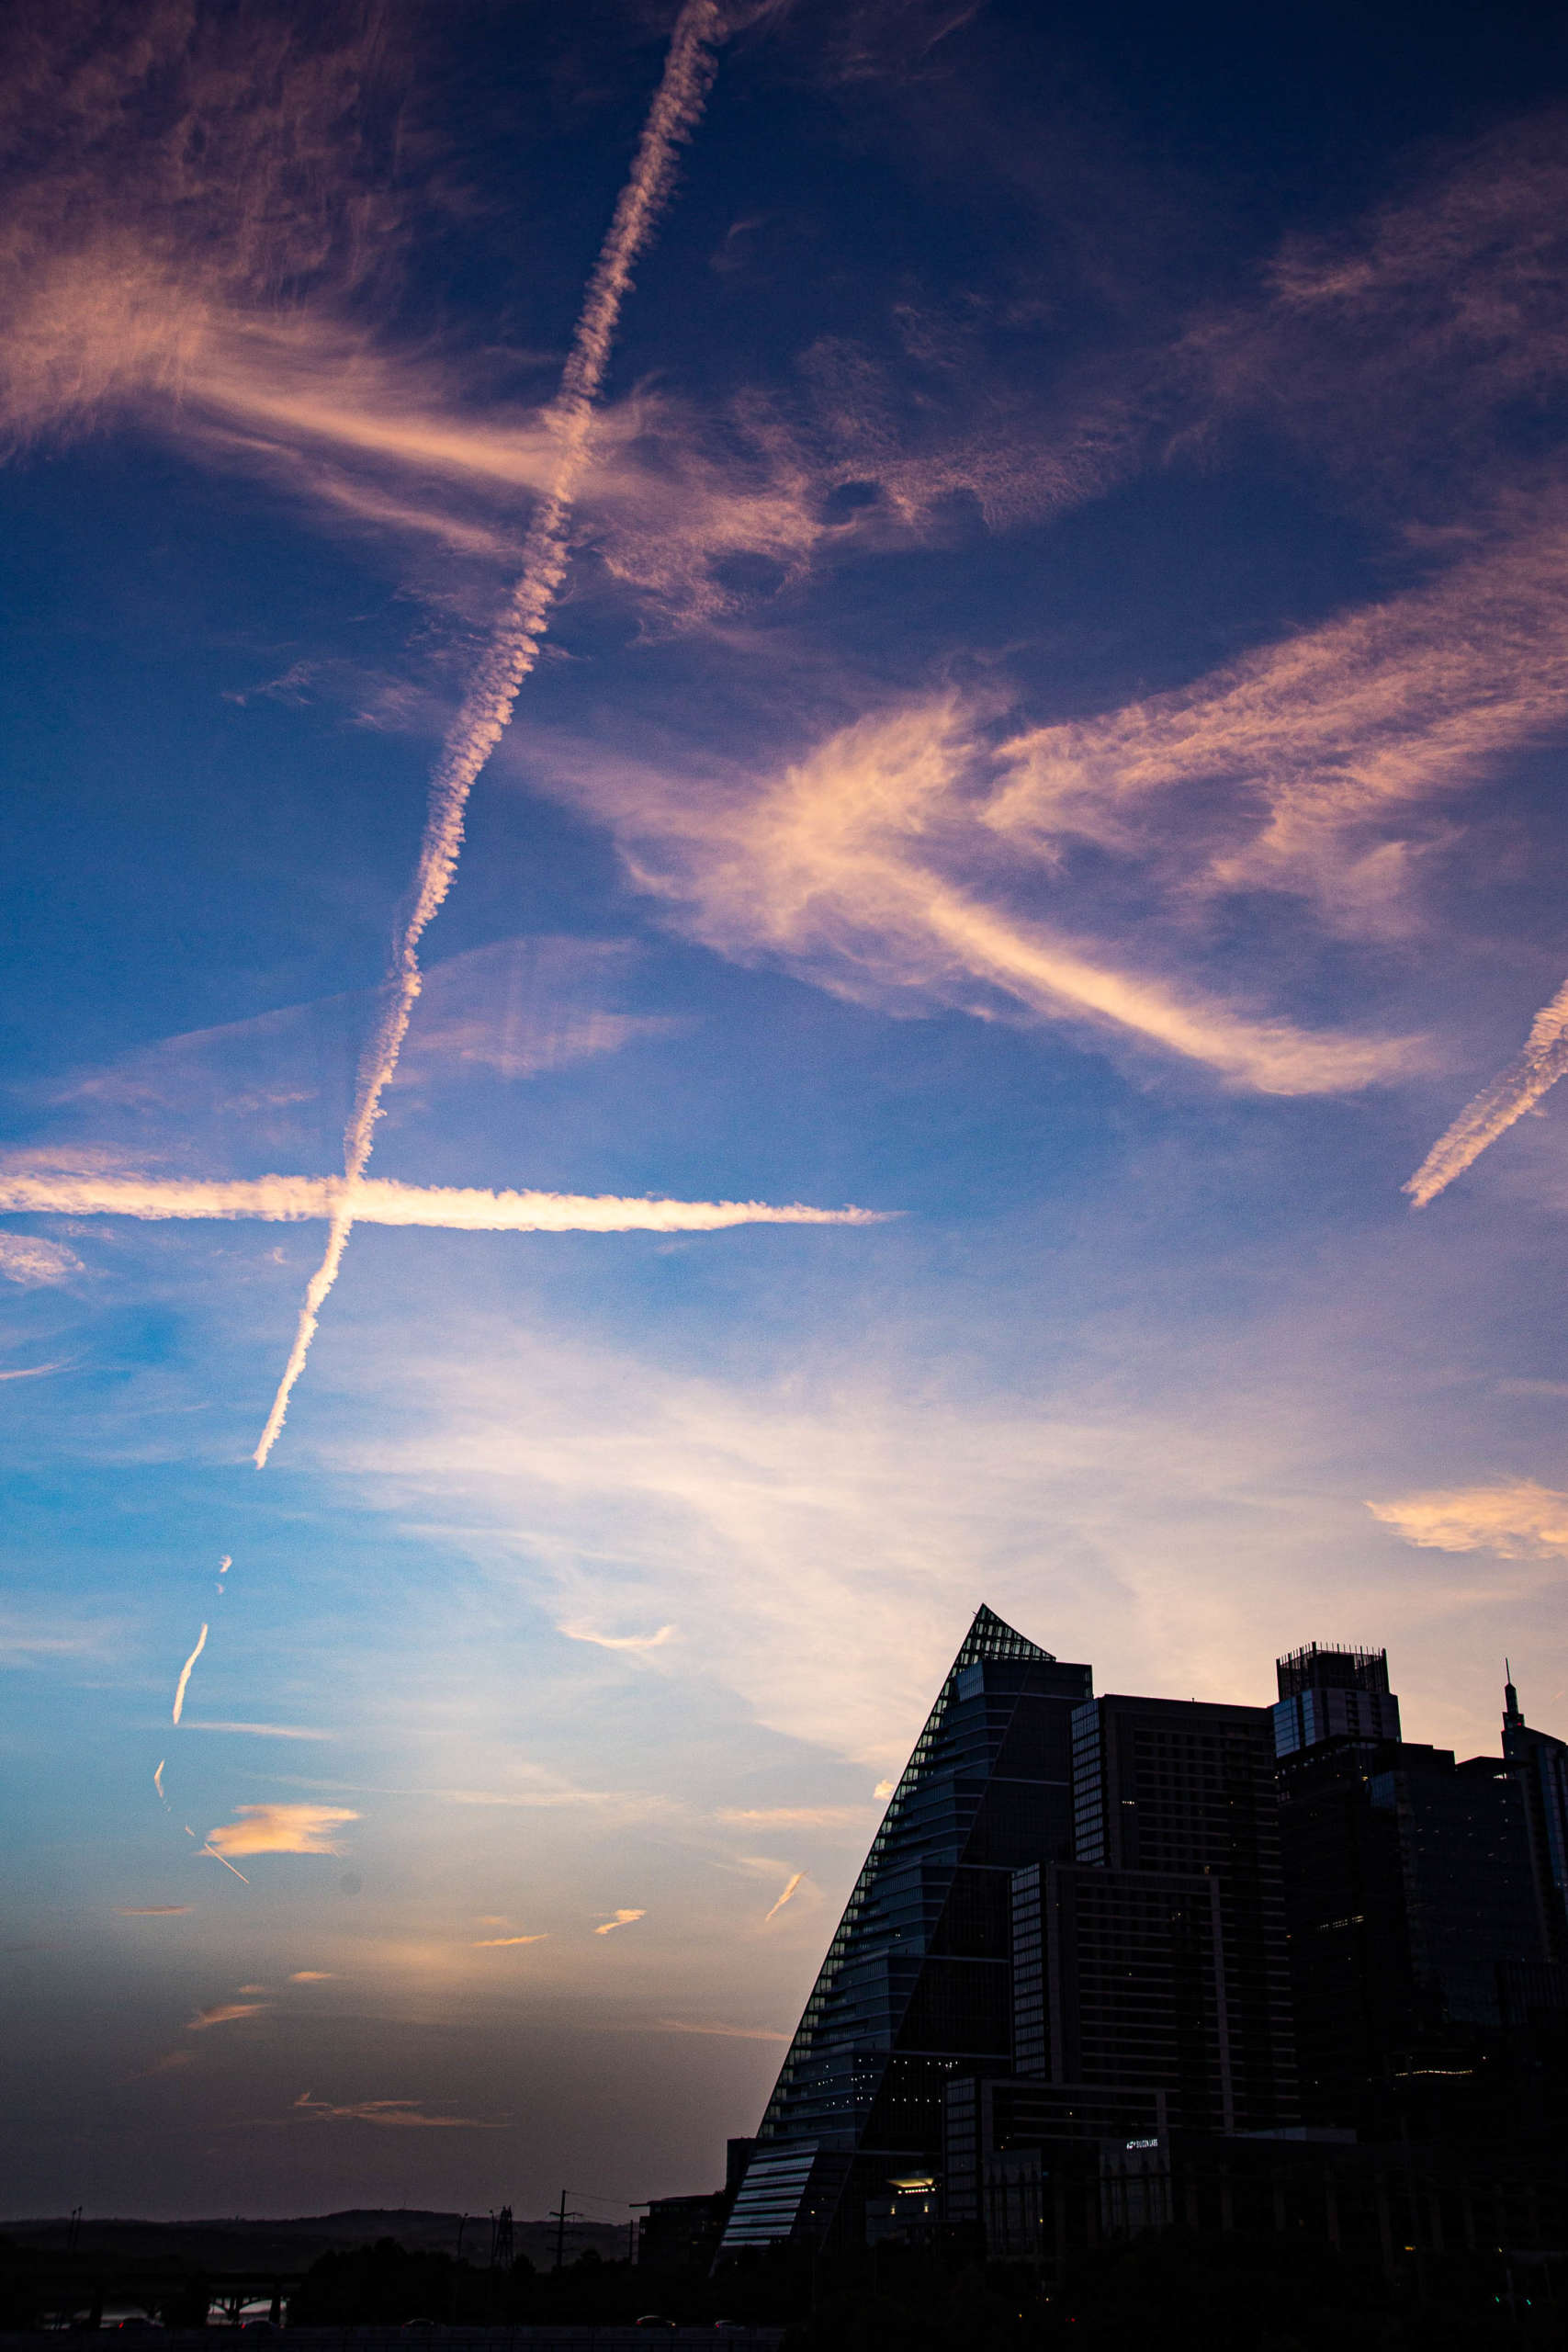 Wispy cirrus clouds, high in a blue sky, intersect with long white jet trails above the silhouette of a city skyline. The edges of the photo are darkened, with the clouds dimming to a vibrant pink.